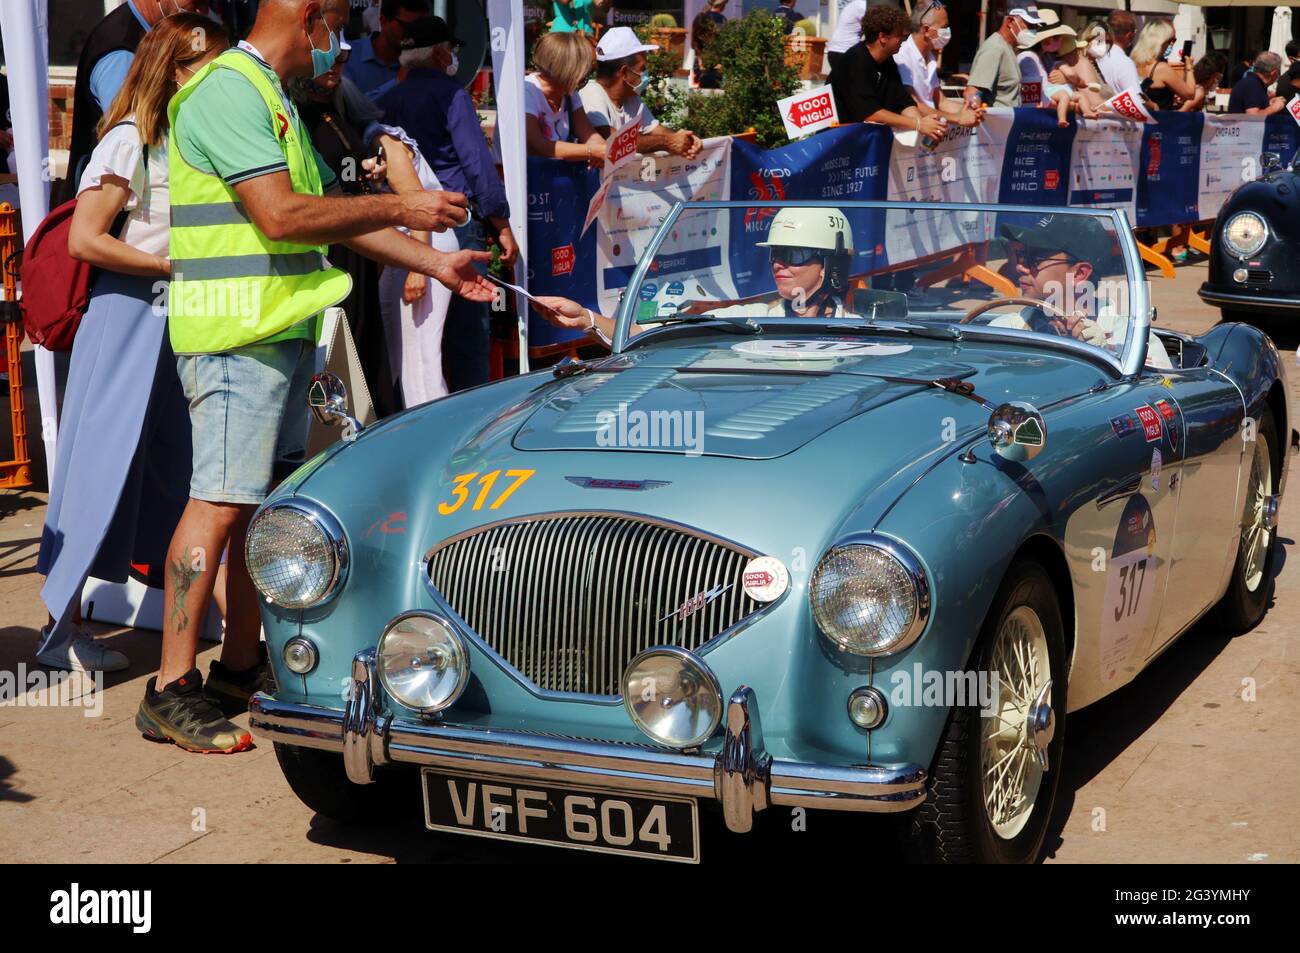 An Austin Healey driven by a Mexican crew seen at the stop of Castiglioncello, Tuscany, of 1000 Miglia Race on  June, 17, 2021. Austin Healey was a British brand of sport cars produced from 1952 to 1972.  (Elisa Gestri/Sipausa) Stock Photo